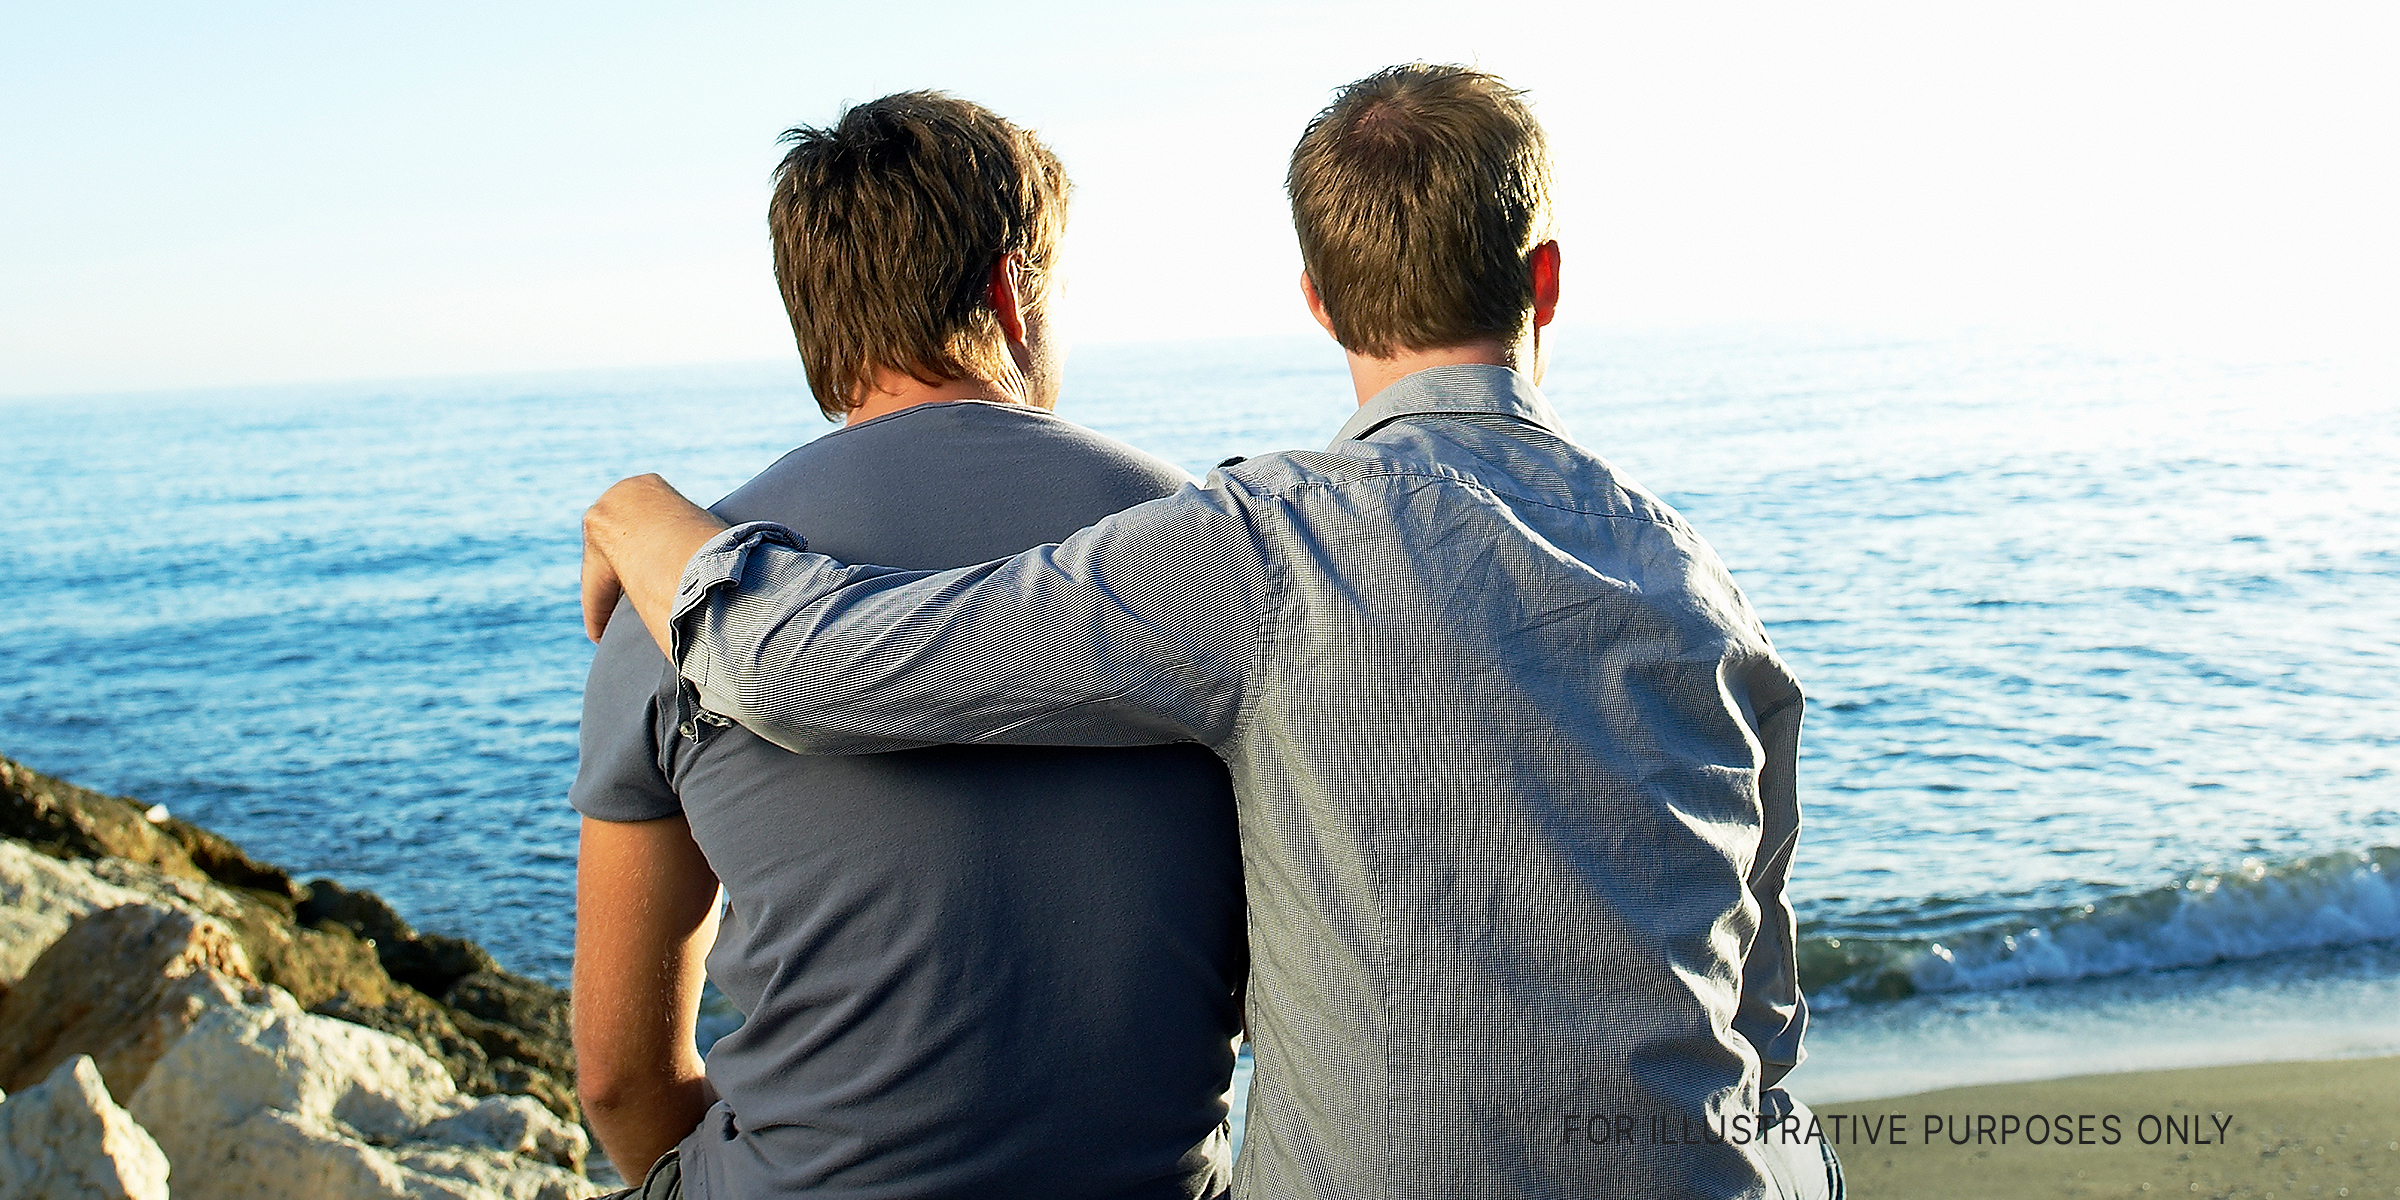 Two men looking at a view while one embraces the other | Source: Getty Images